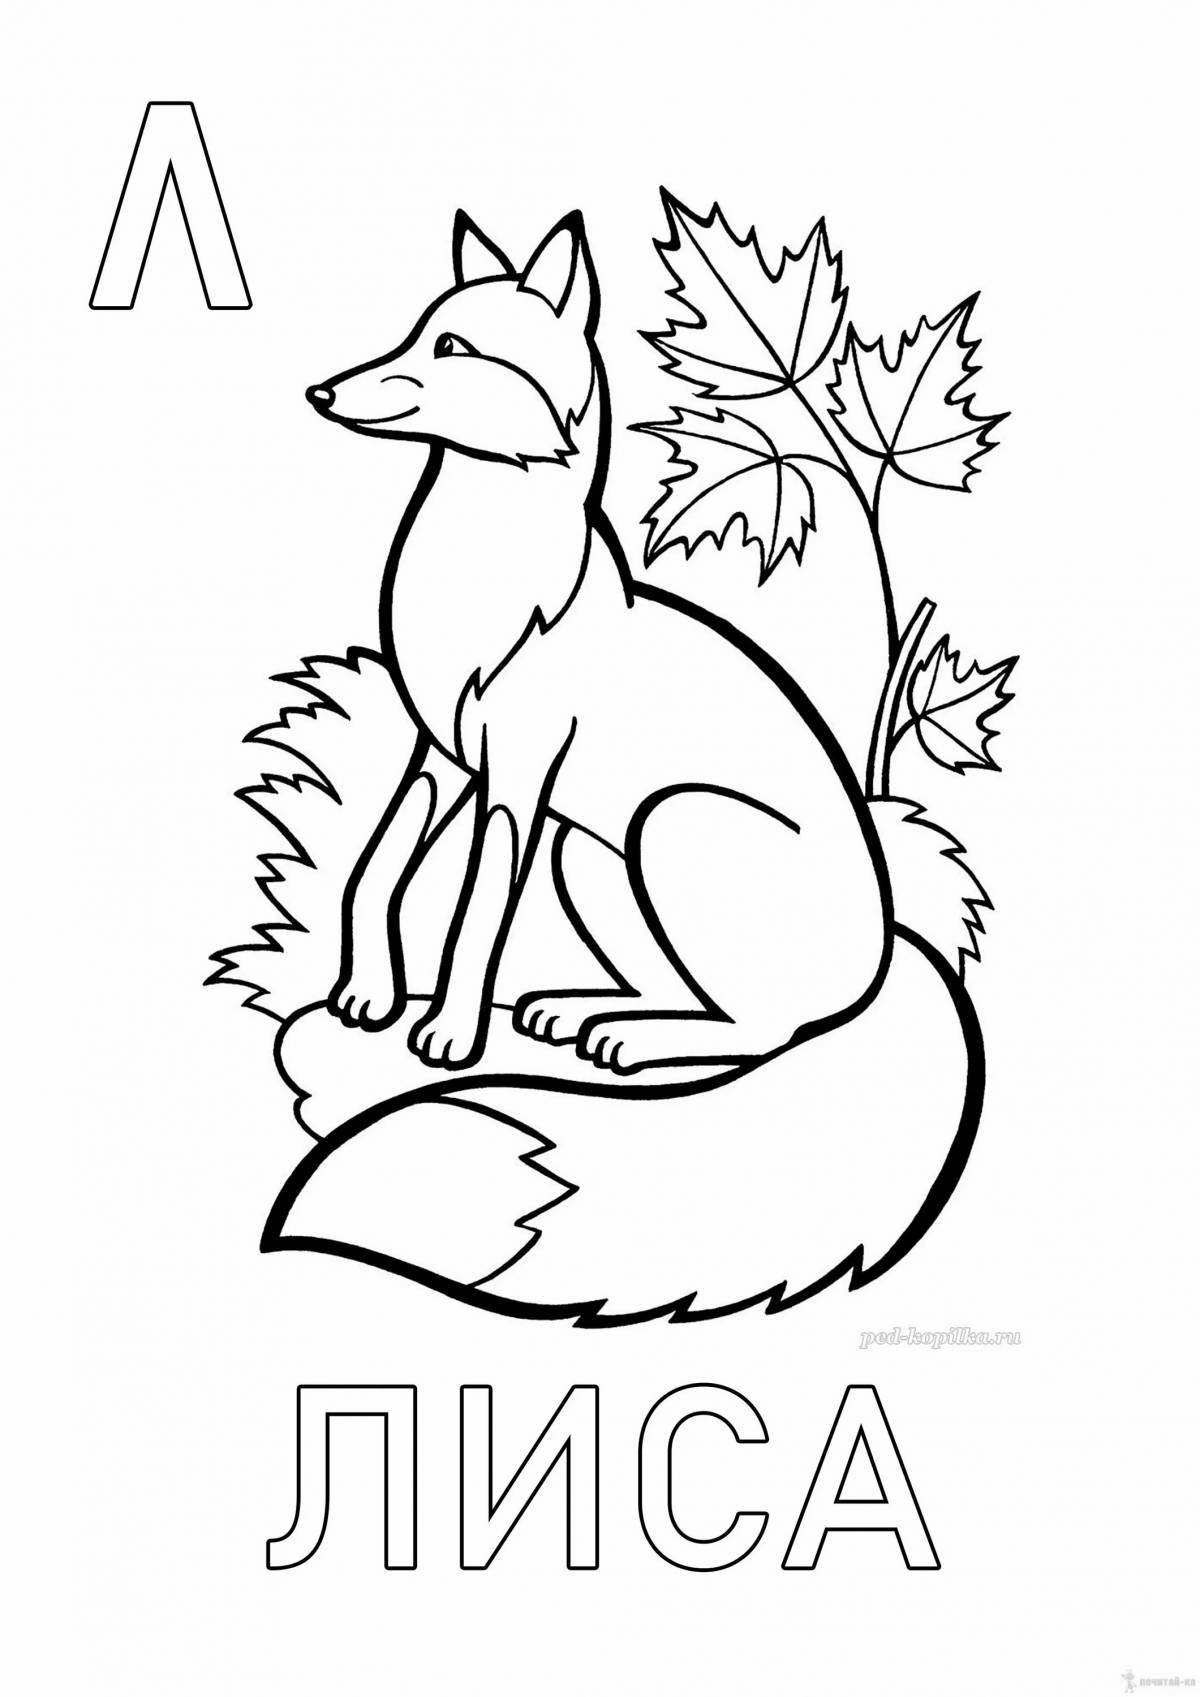 Animated fox coloring book for kids